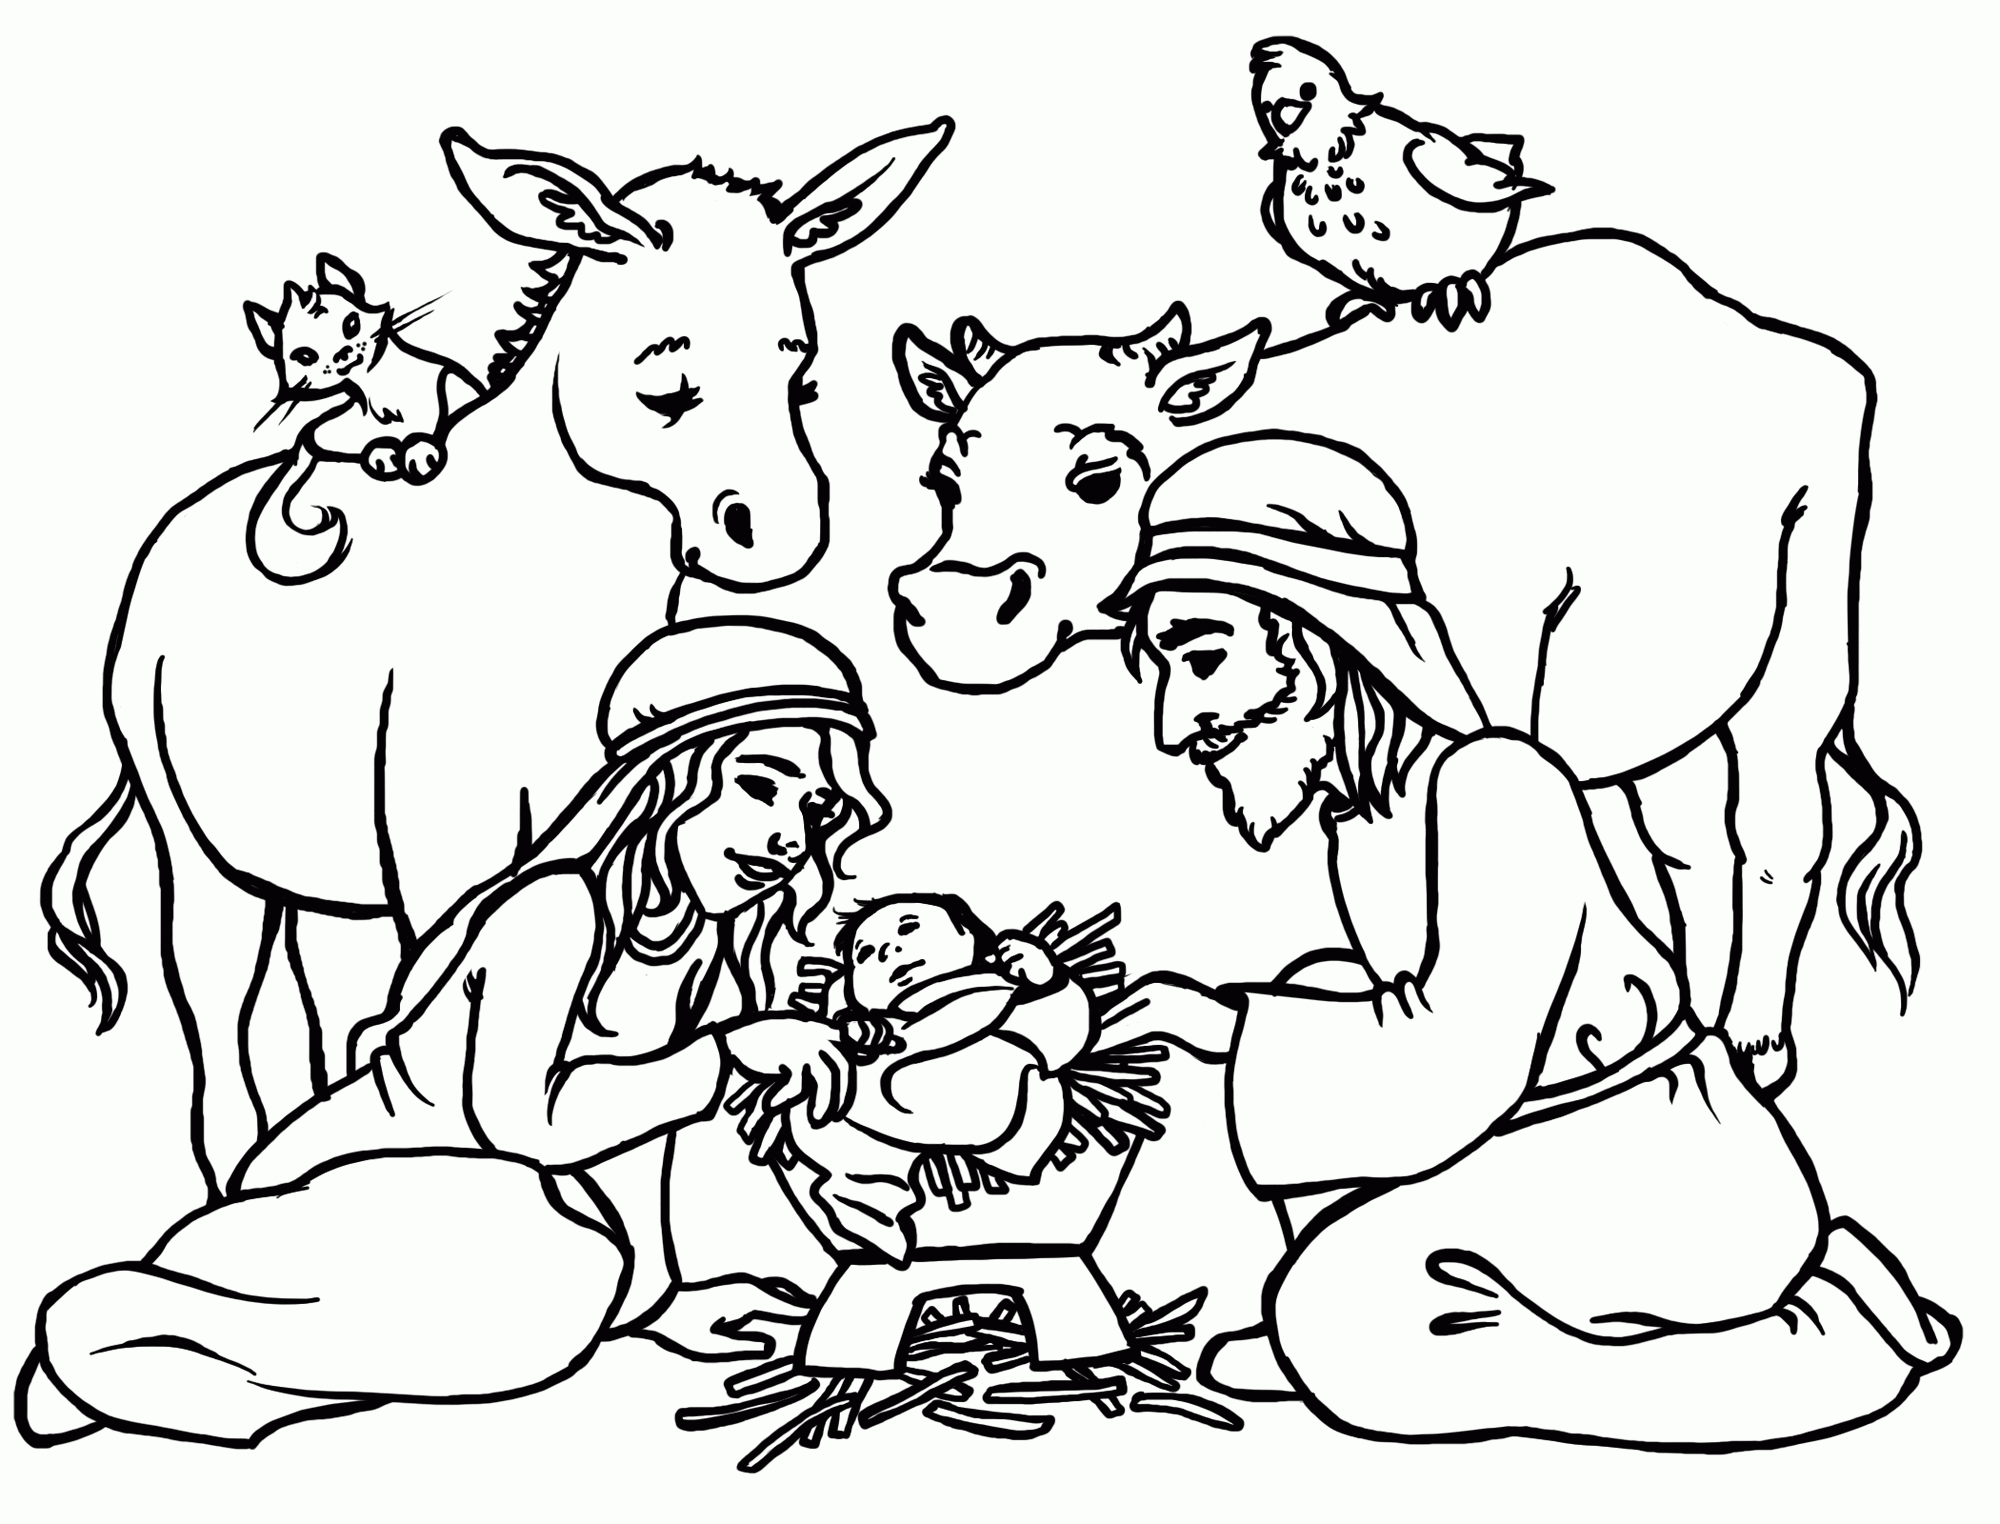 Coloring Pages Birth - Coloring Pages For All Ages